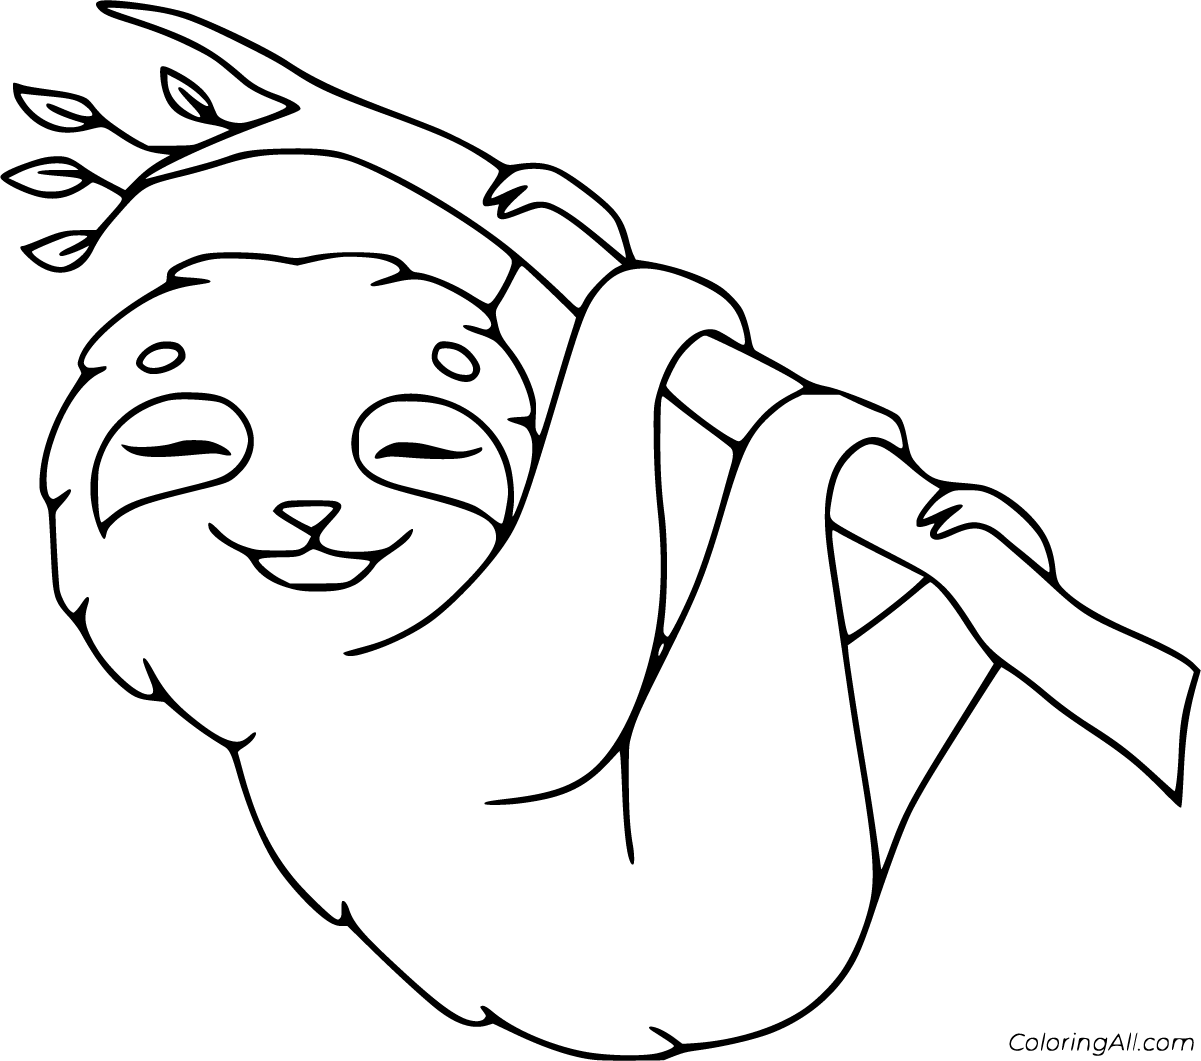 Sloth Coloring Pages - ColoringAll